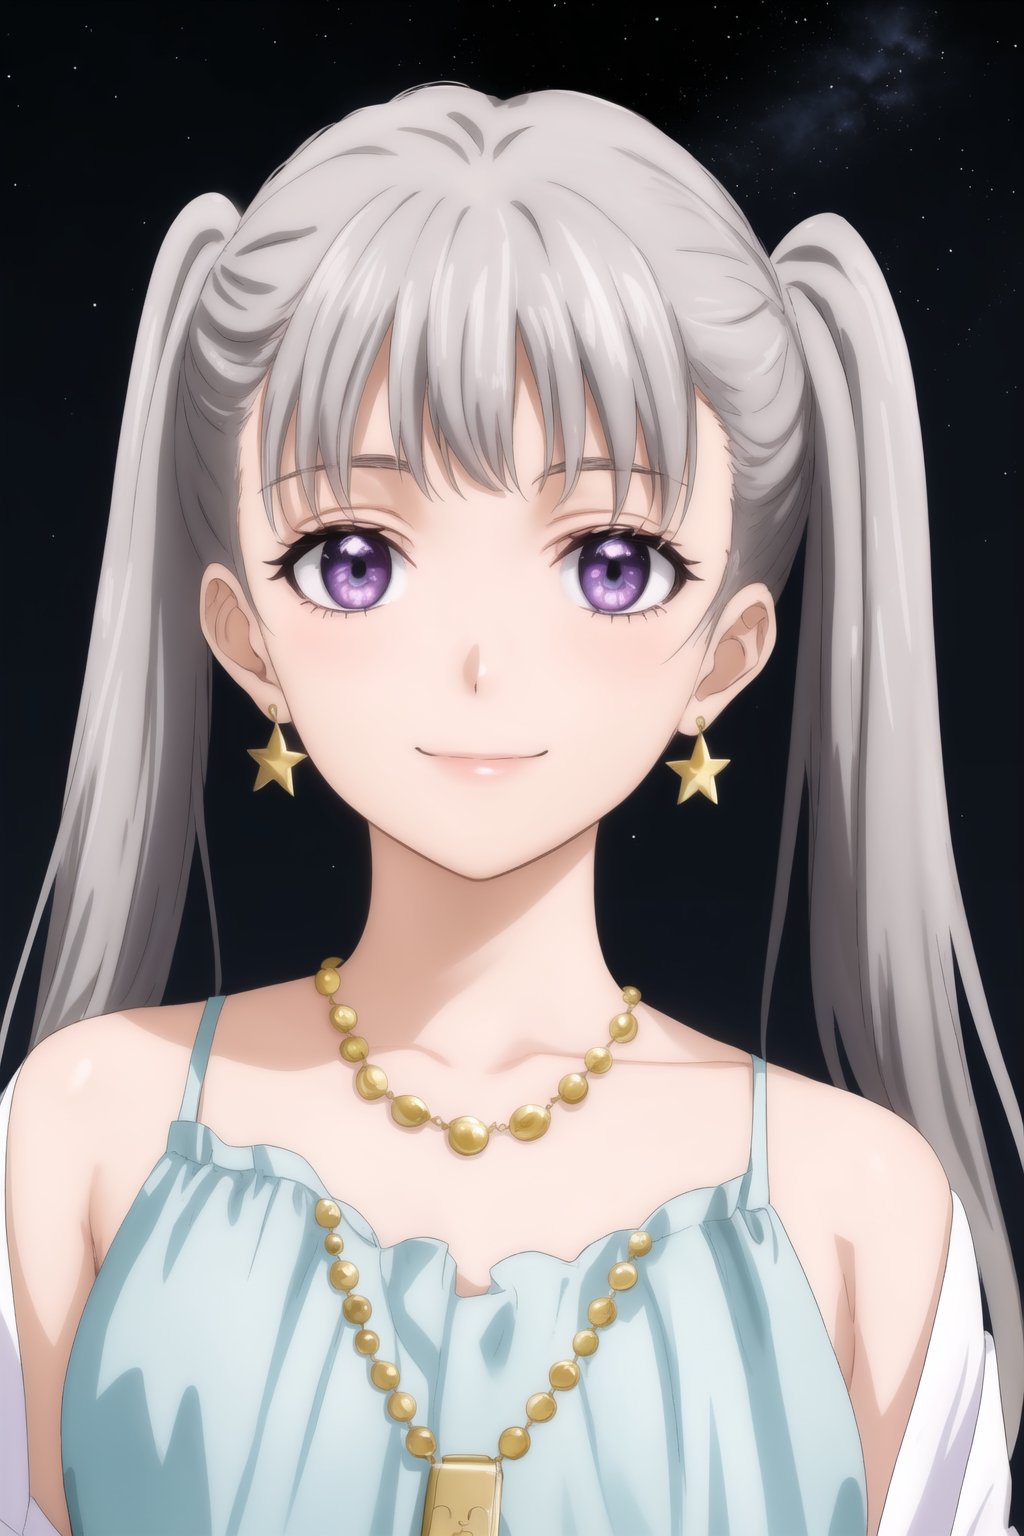 Beautiful and delicate light, (beautiful and delicate eyes), pale skin, big smile, brown eyes, black brown long hair, dreamy, c cup chest, 2000s (style), front shot, Asian girl, bangs, soft expression, height 170, elegance, bright smile, 8k art photo, realistic concept art, realistic, portrait, necklace, small earrings, handbag, fantasy, jewelry, shyness,  white_shirt, one piece dress, snowy street, footprints, stars_(sky), night_sky, ,JeeSoo , noelle_silva, purple eyes, (twintail silver hair:1.05)